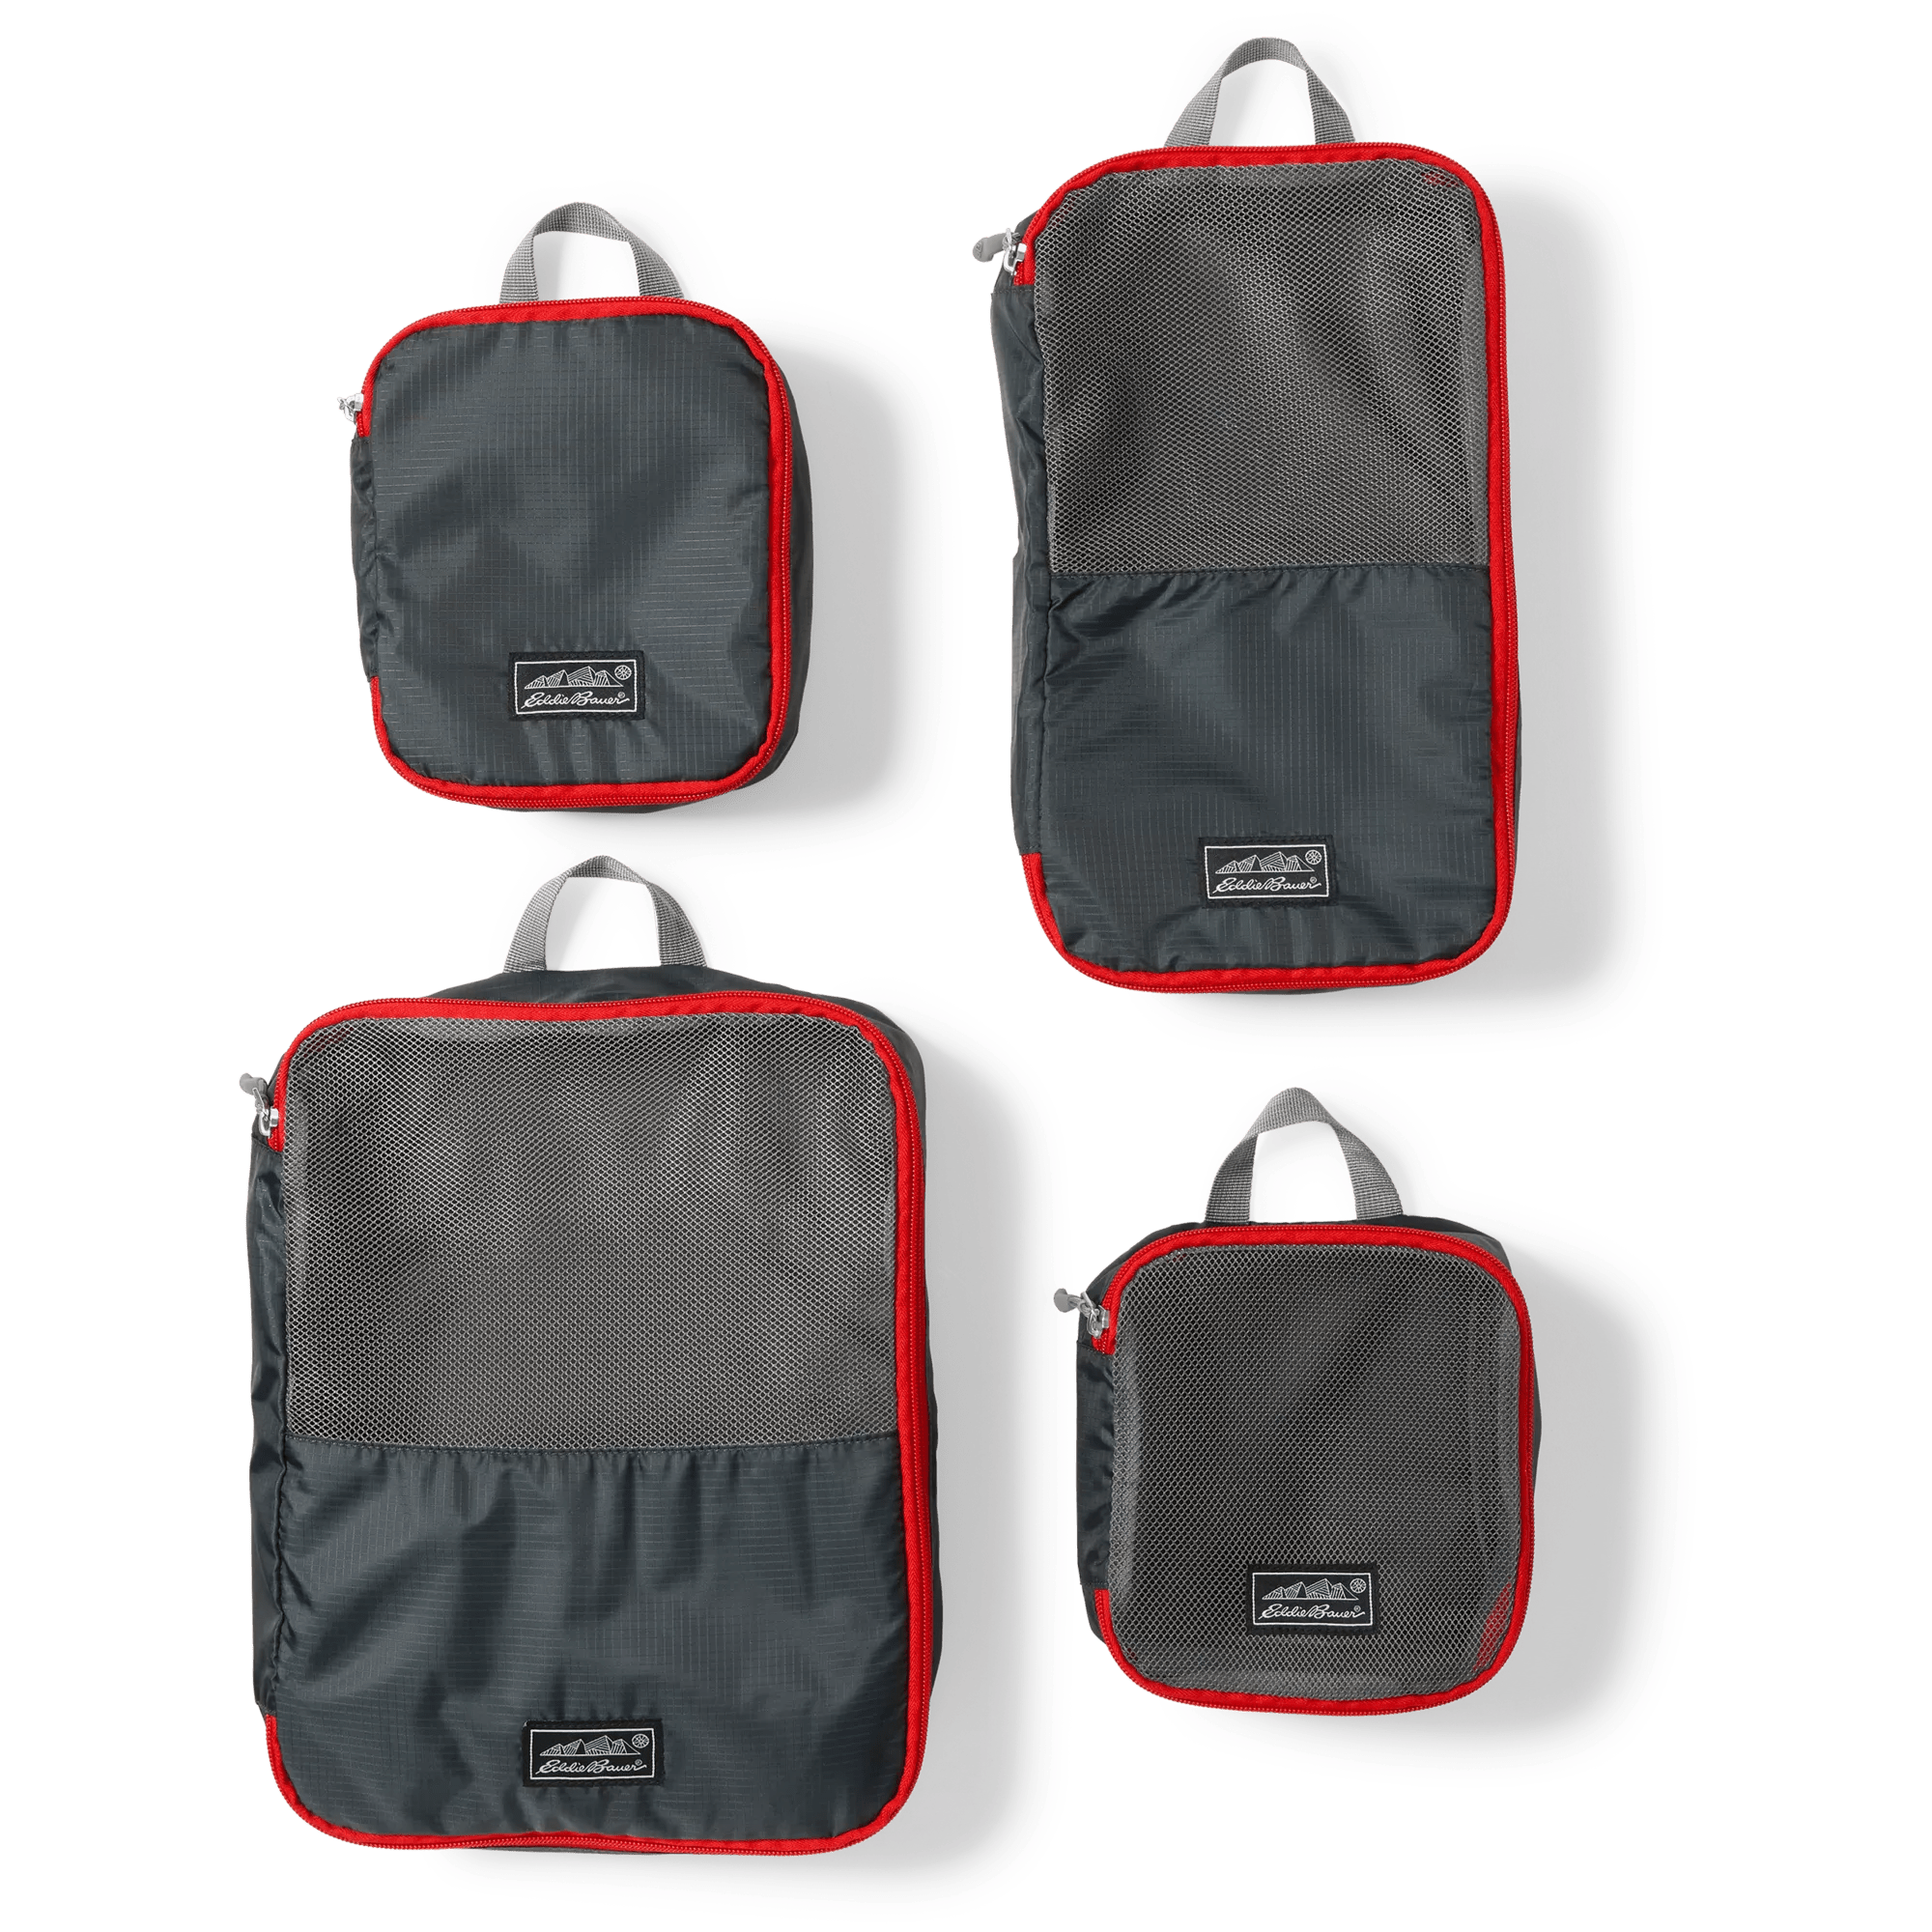 Expedition 2.0 Packing Cubes - Set of 4